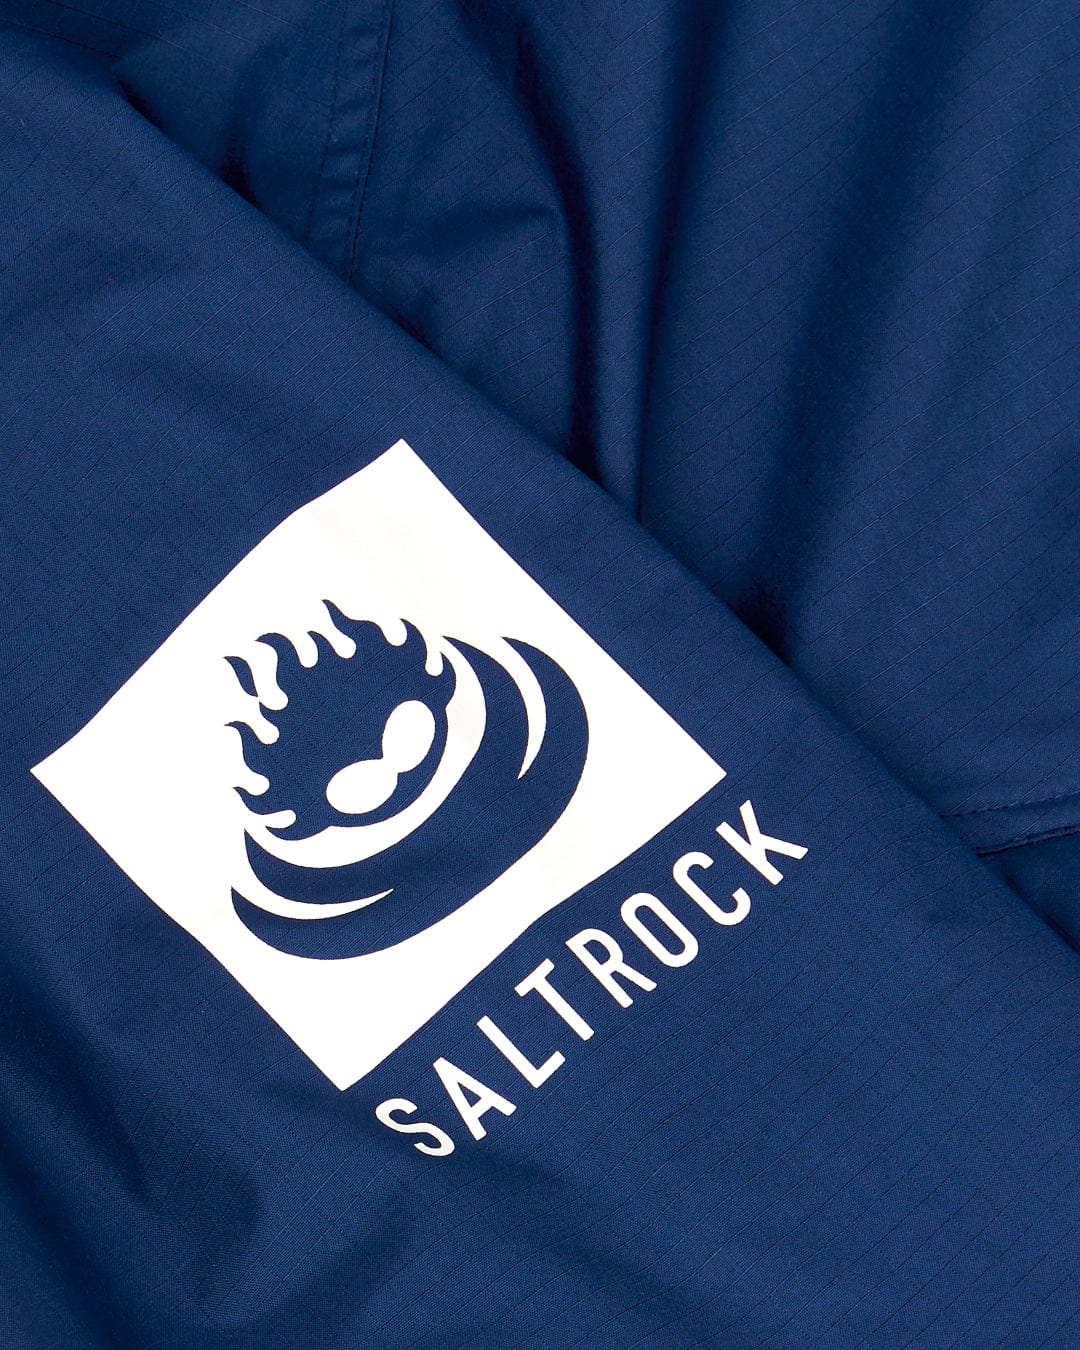 Close-up of a blue Recycled Four Seasons changing robe featuring the Saltrock logo with a stylized flame and wave design in white.